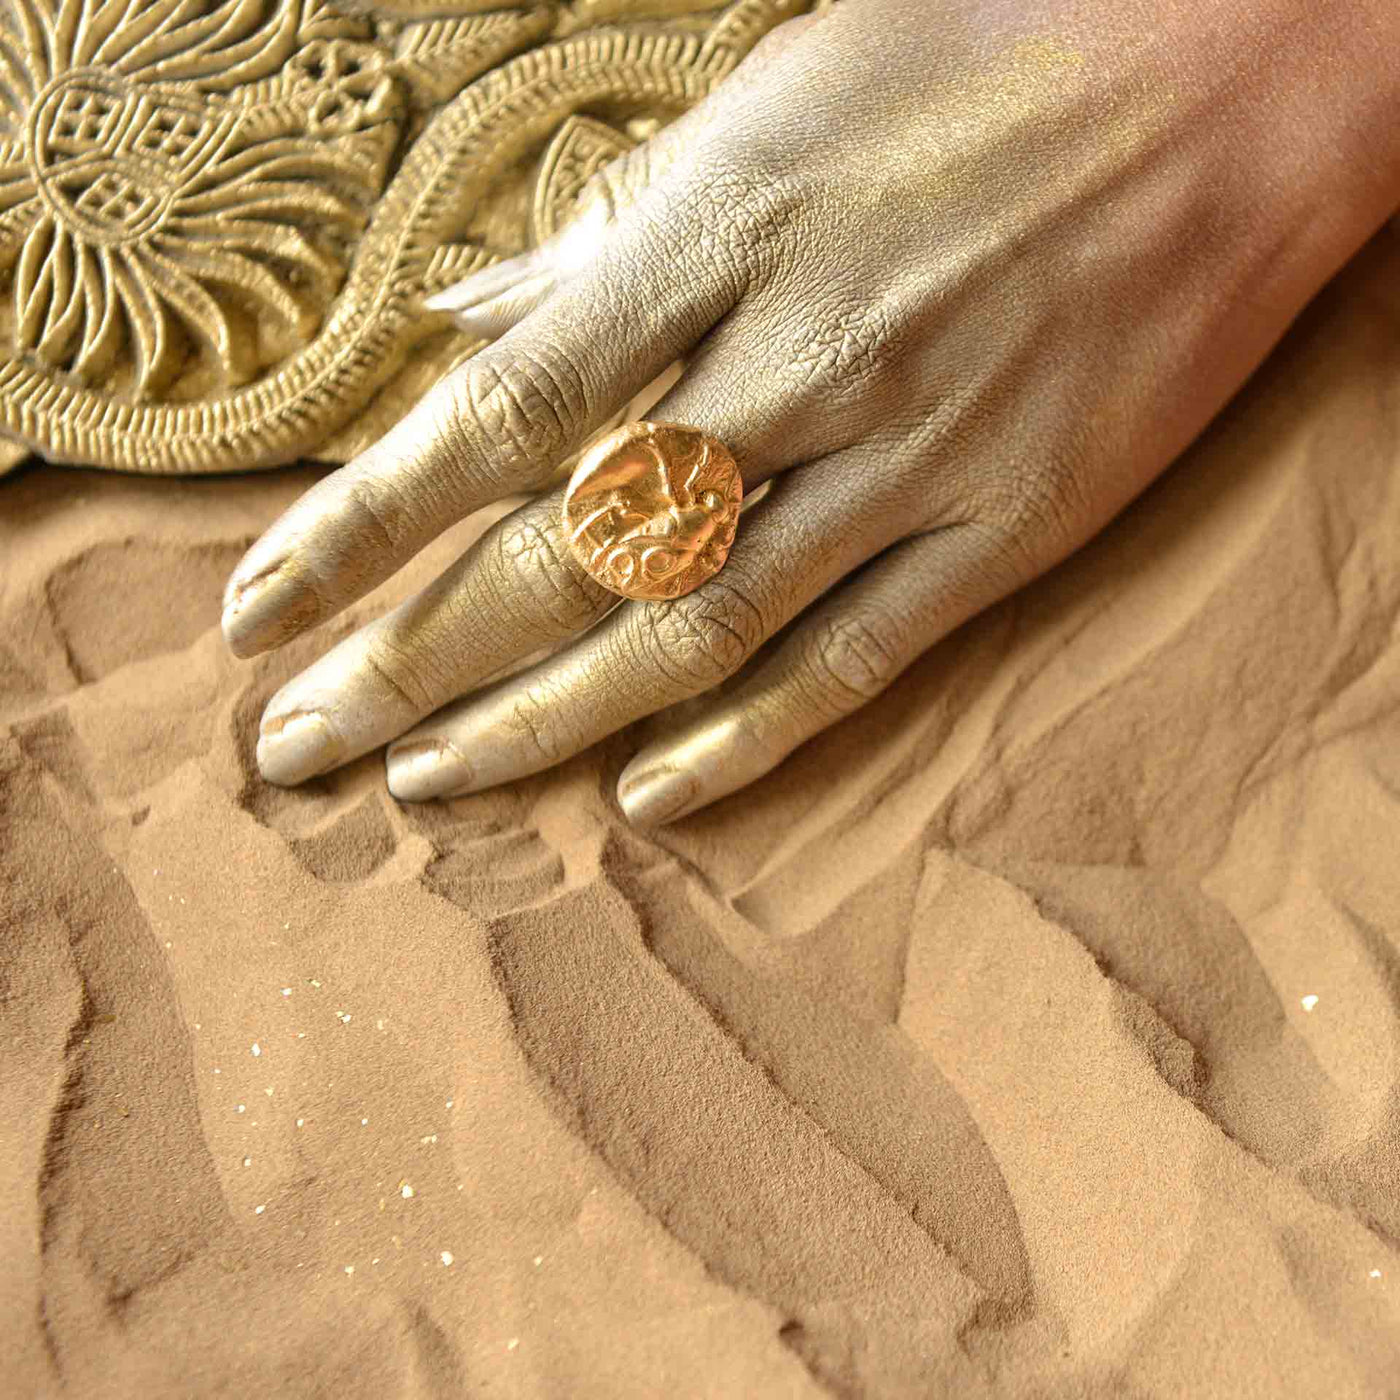 A Dye gold ring, made of gold plated brass, with a fossil design.